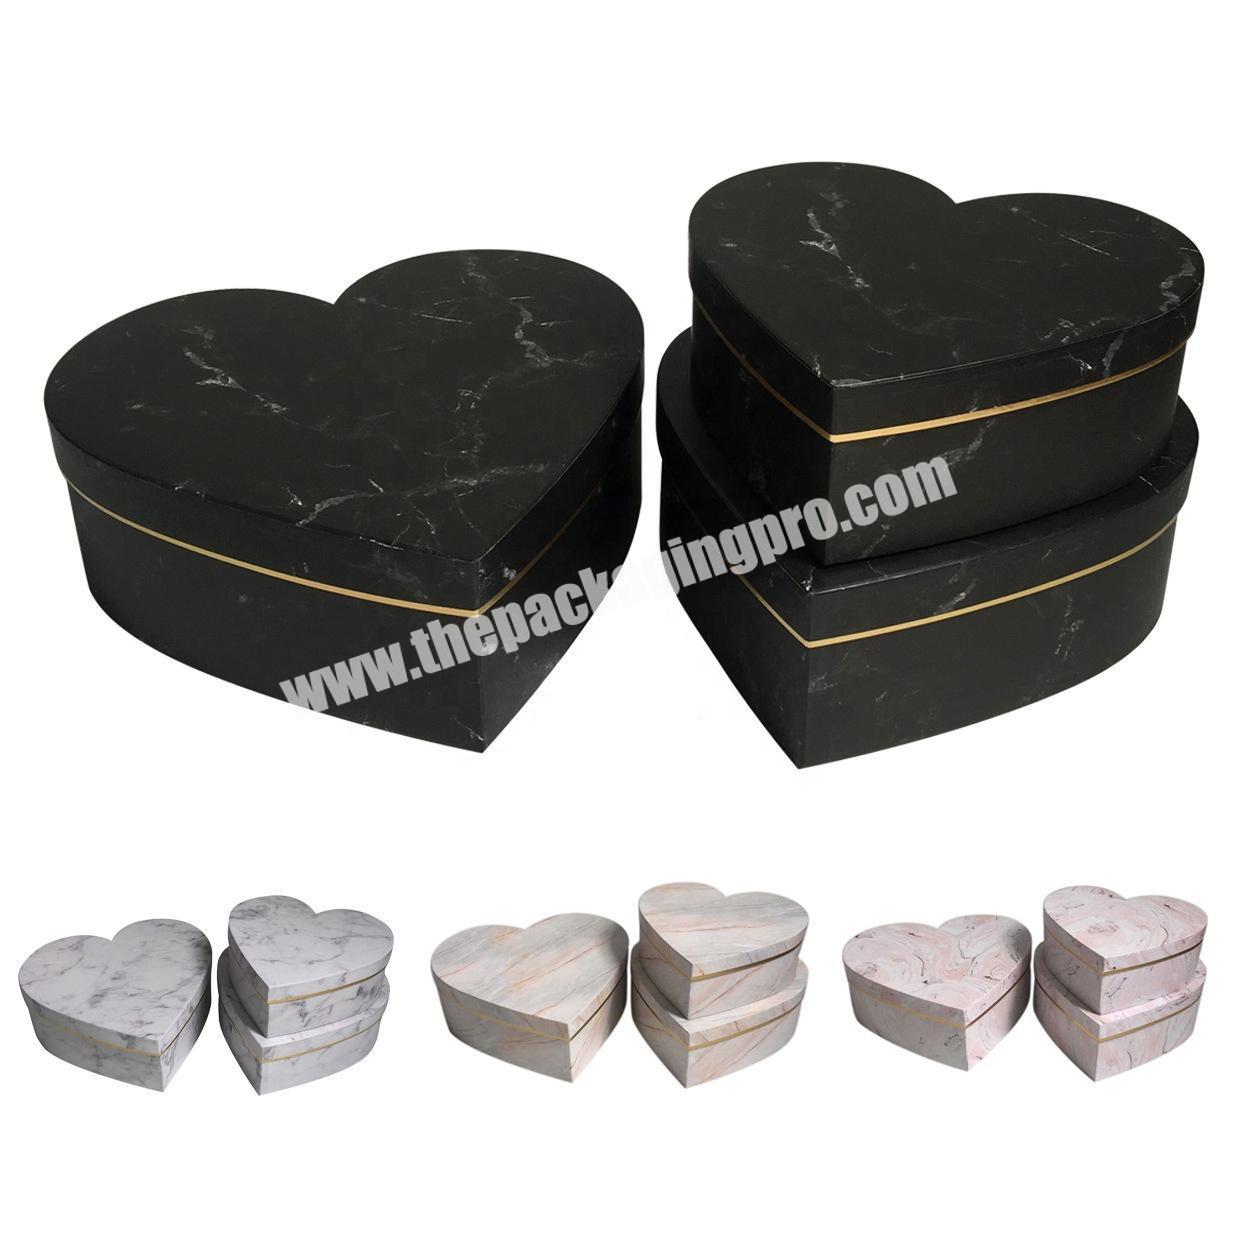 luxury heart-shaped gift box preserved heart shaped empty sweet boxes romantic heart paper box with lids